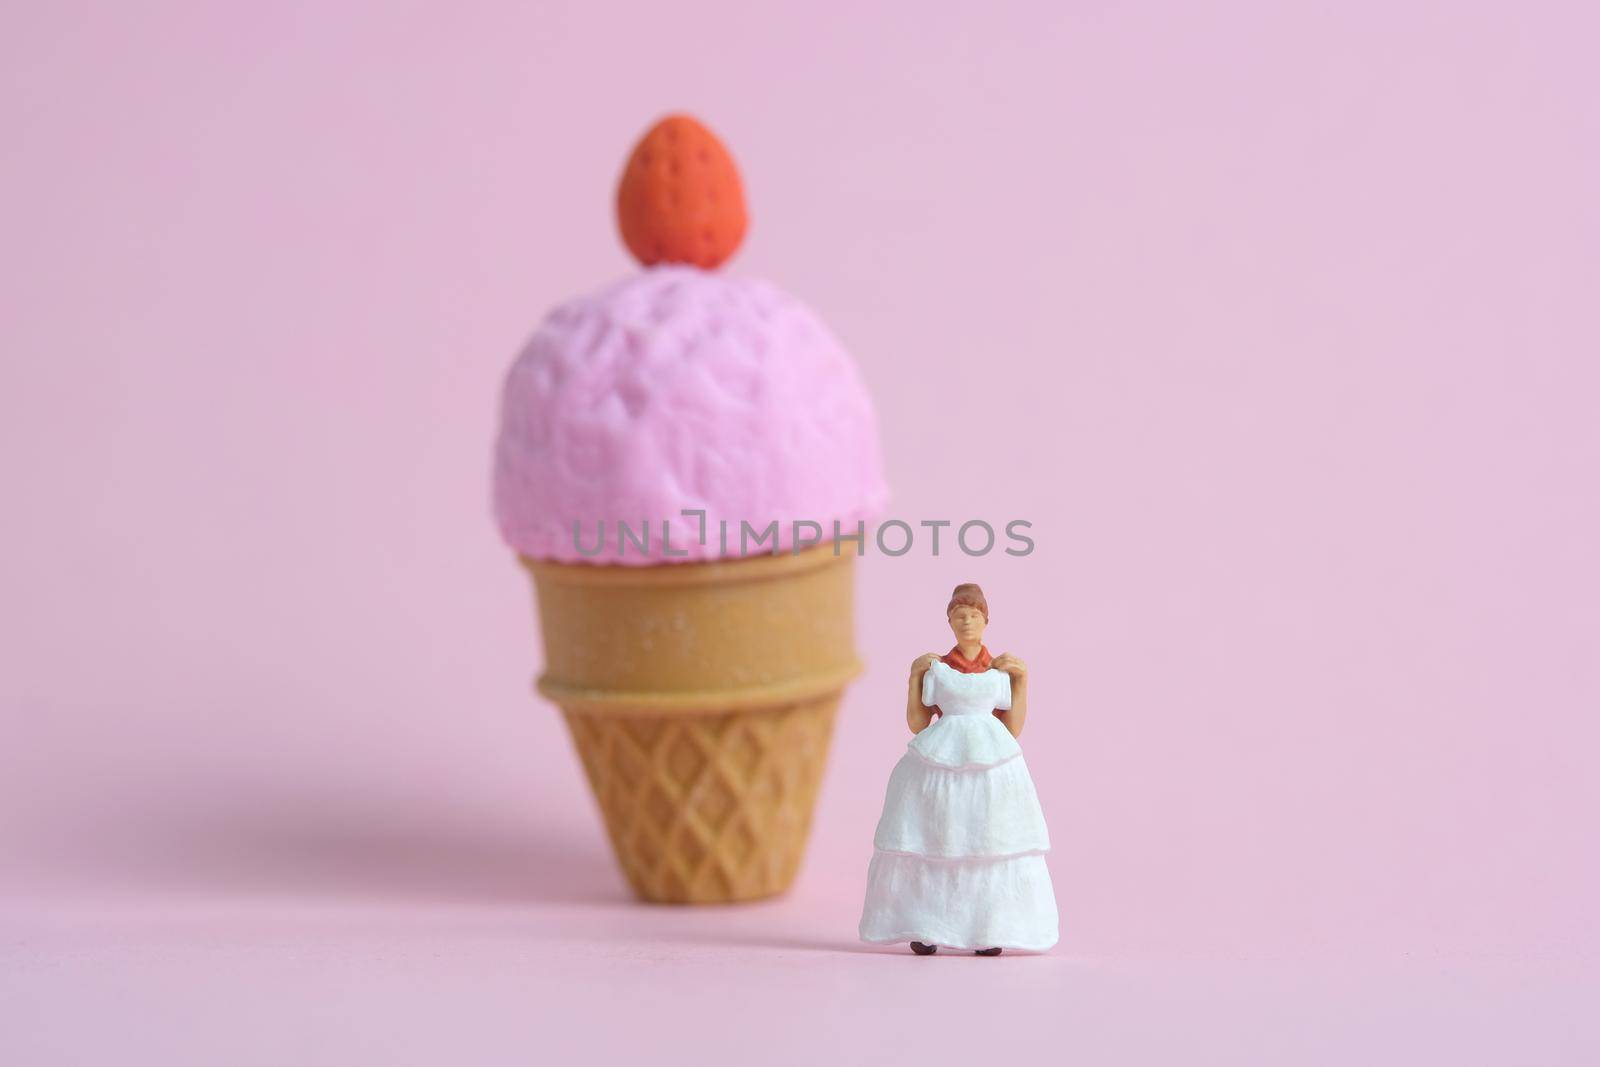 Woman dieting from ice cream and fat before wedding day concept. Miniature people toys photography, girl holding wedding dress. Image photo by Macrostud